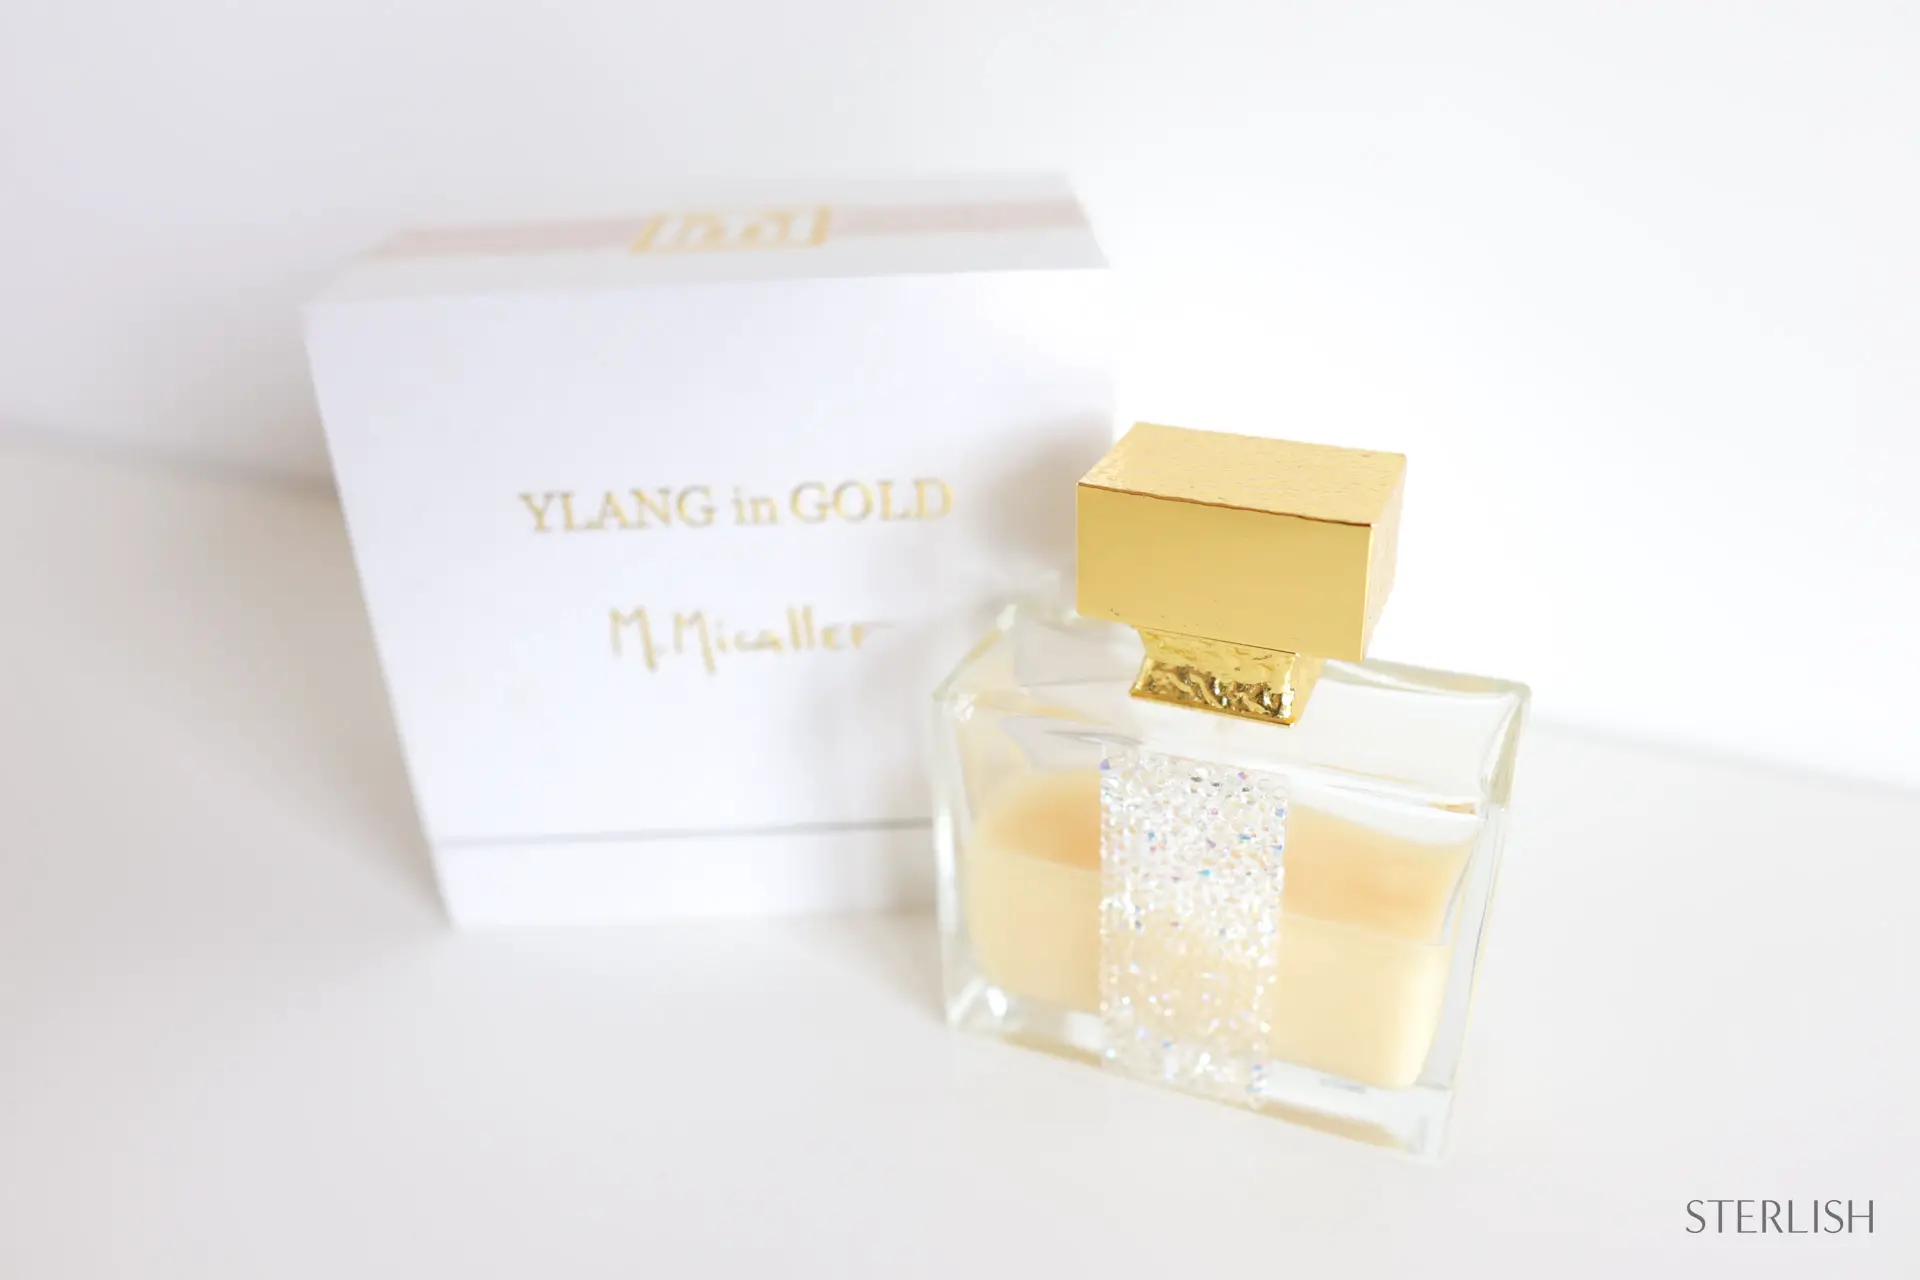 ylang in gold travel size